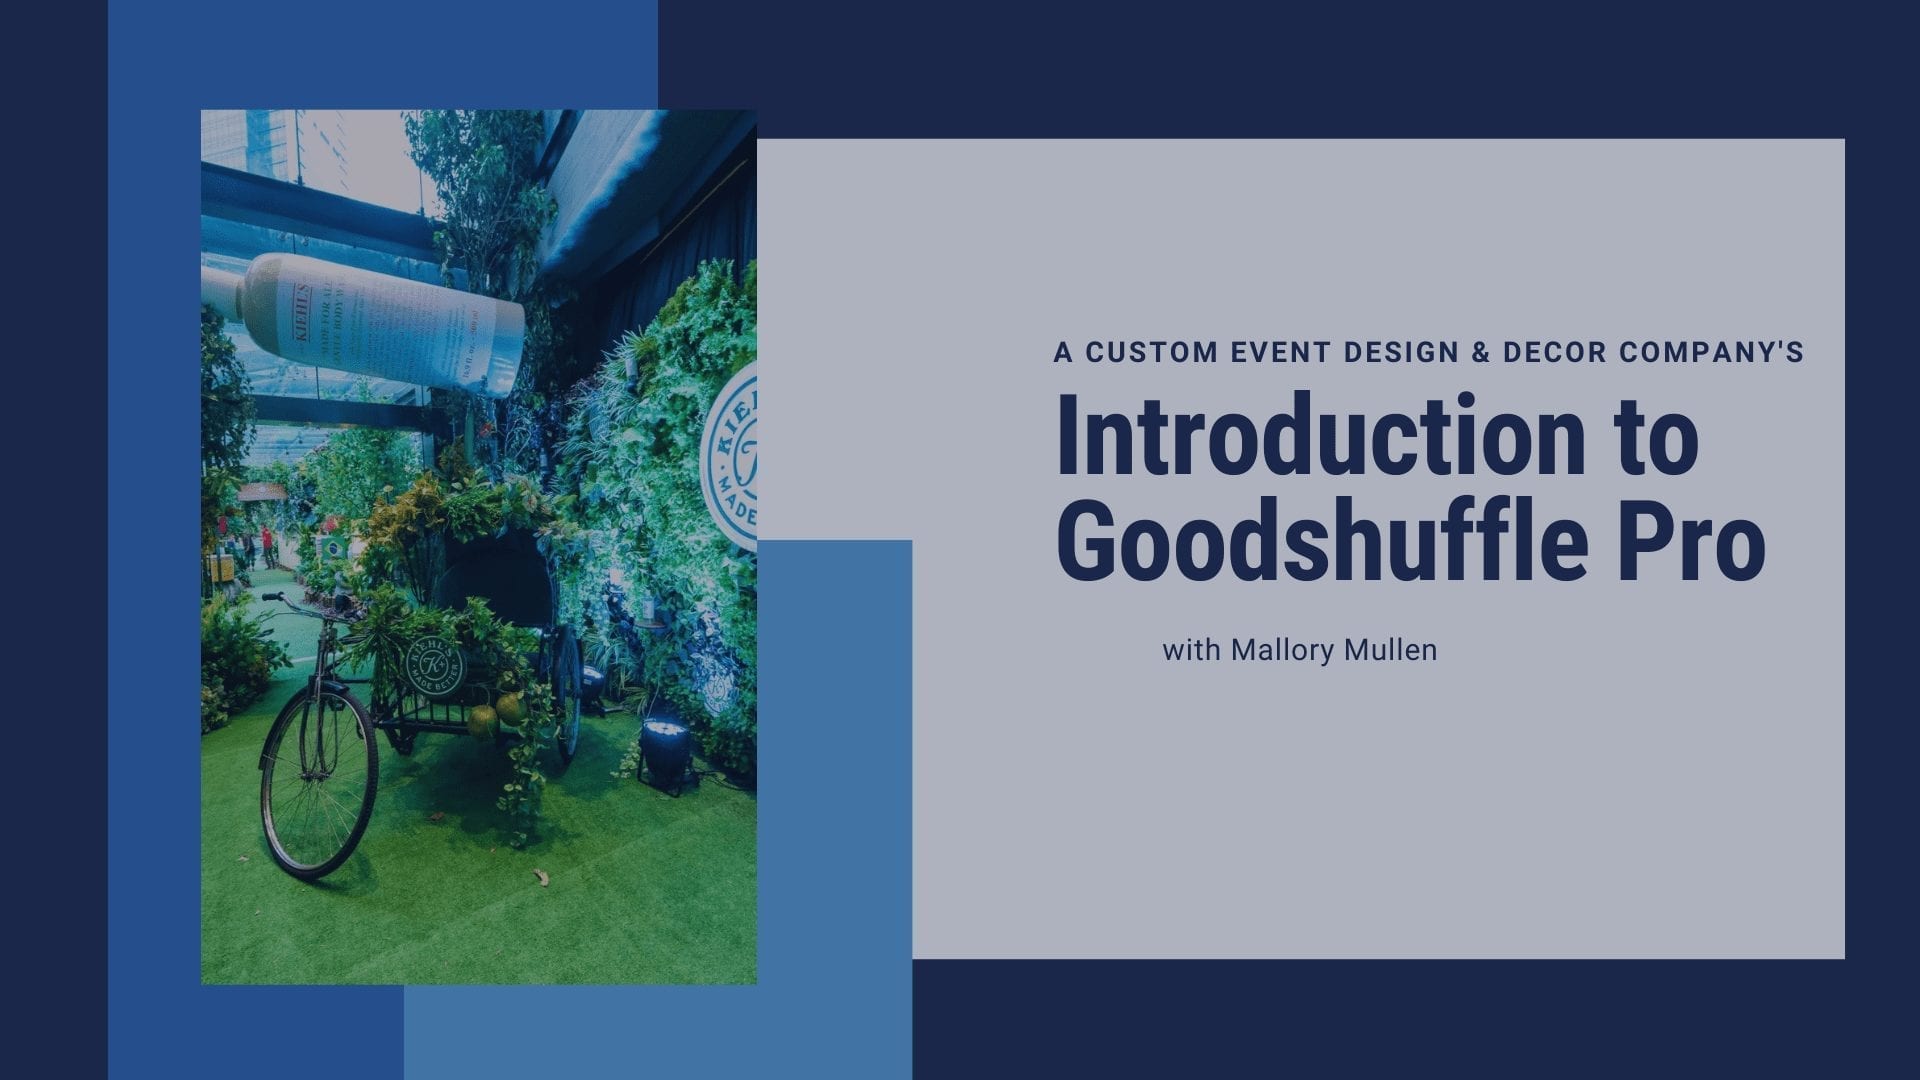 Introduction to Goodshuffle Pro for event design and decor companies